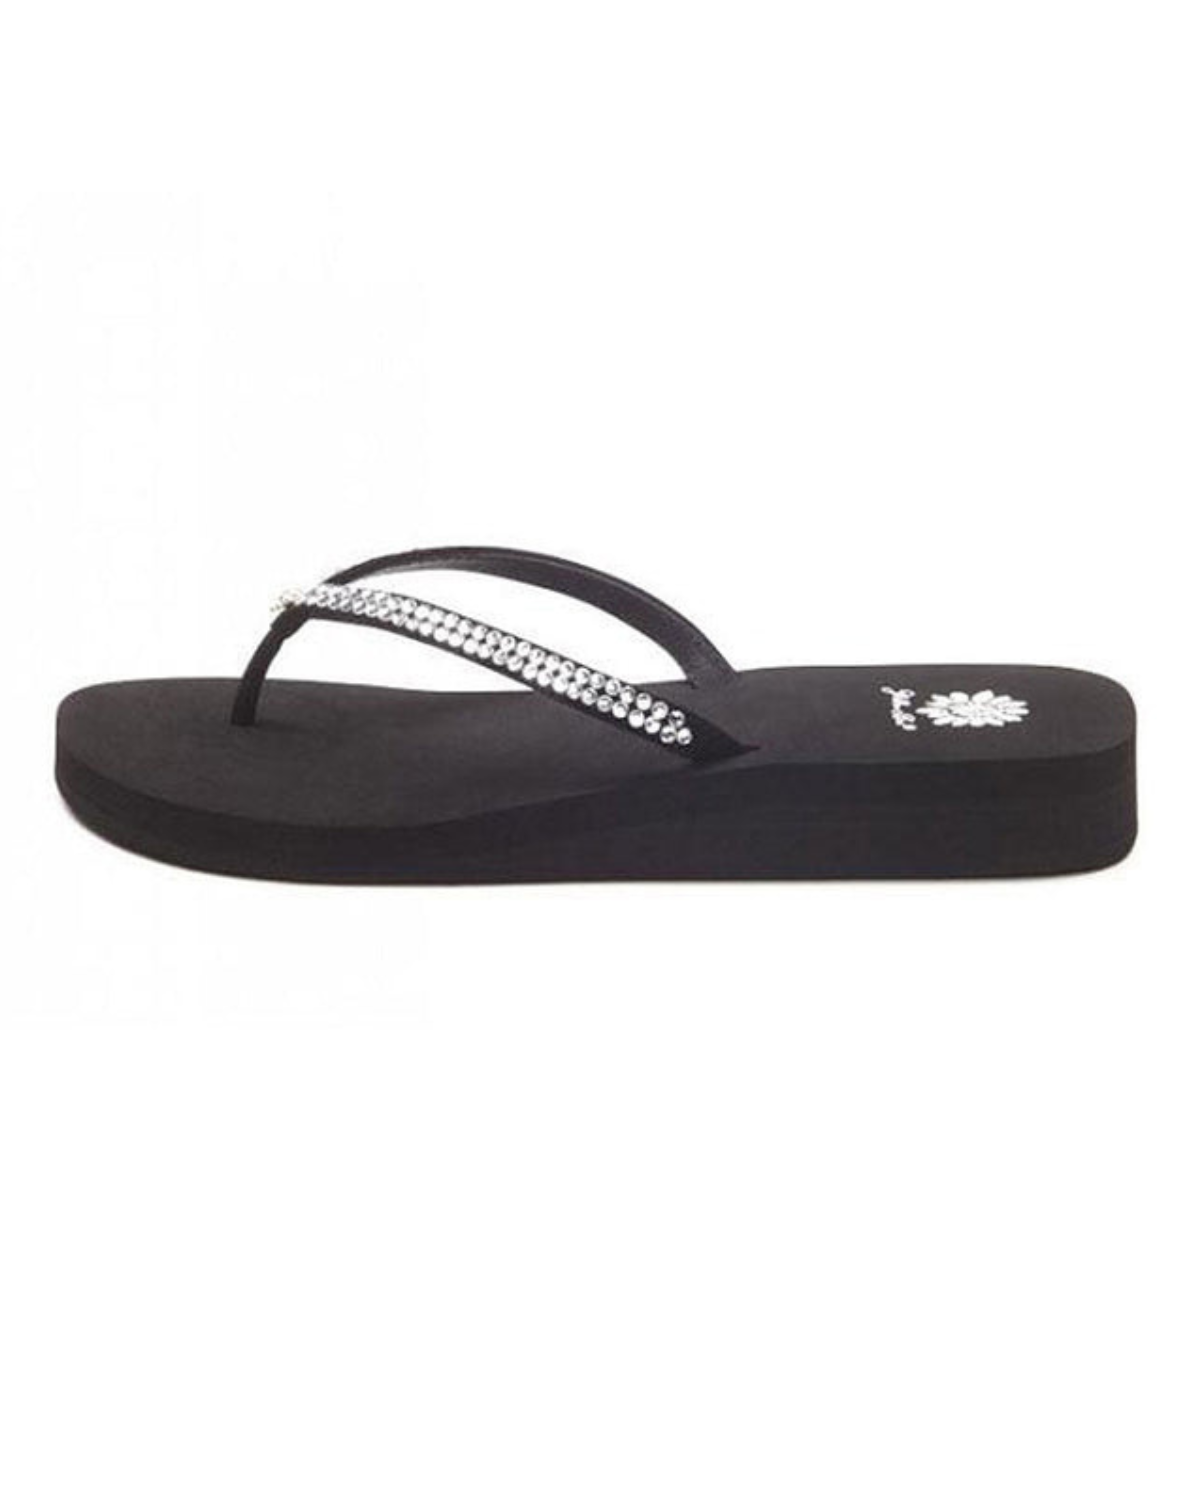 Women's black wedge sandal with rhinestones on the strap.